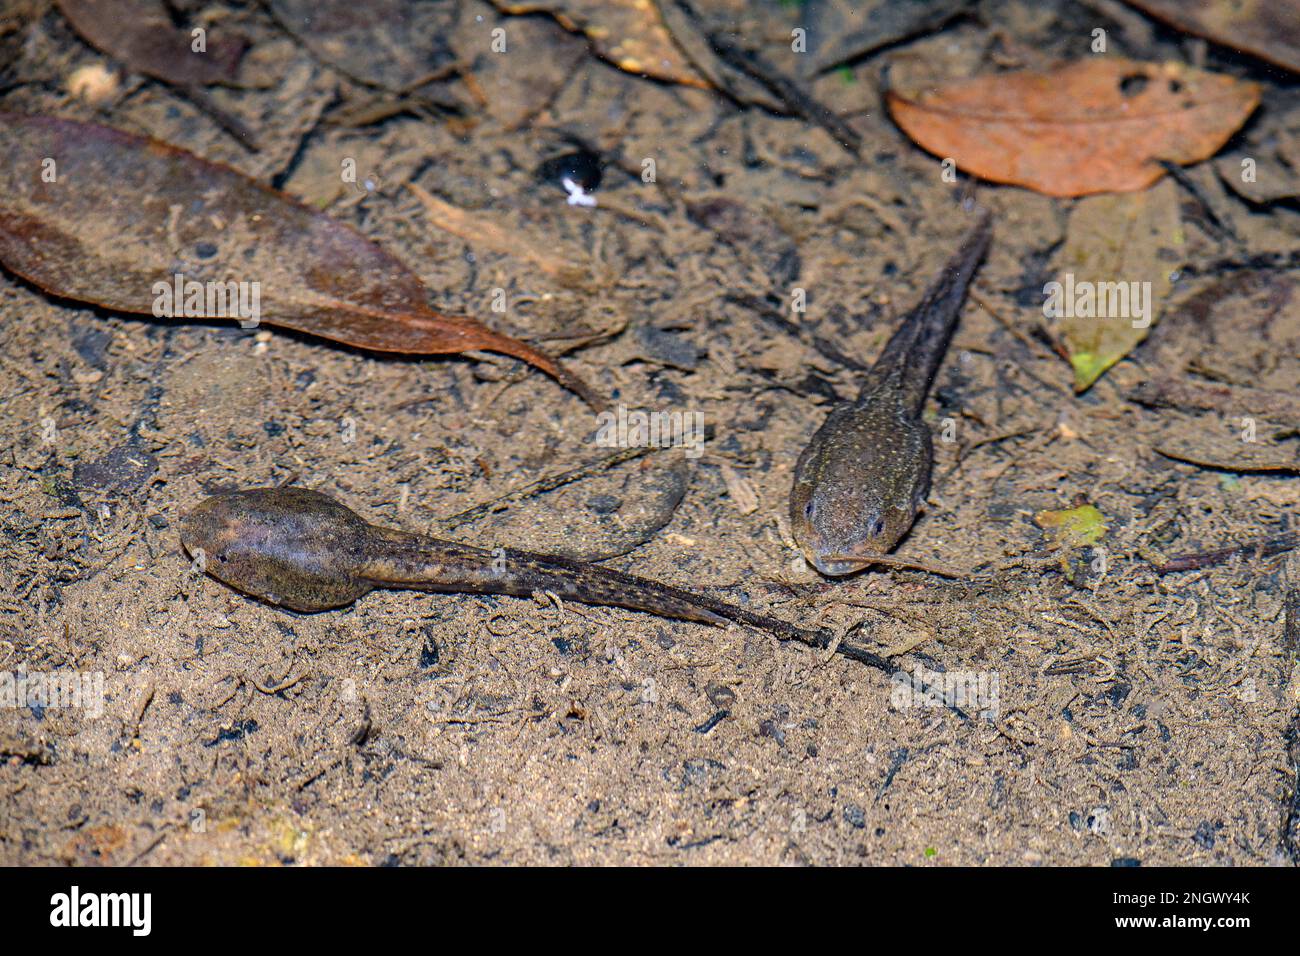 Large tadpoles of the otton frog (Babina subaspera) from the temperate forest of Amami Oshima, southern Japan. Stock Photo